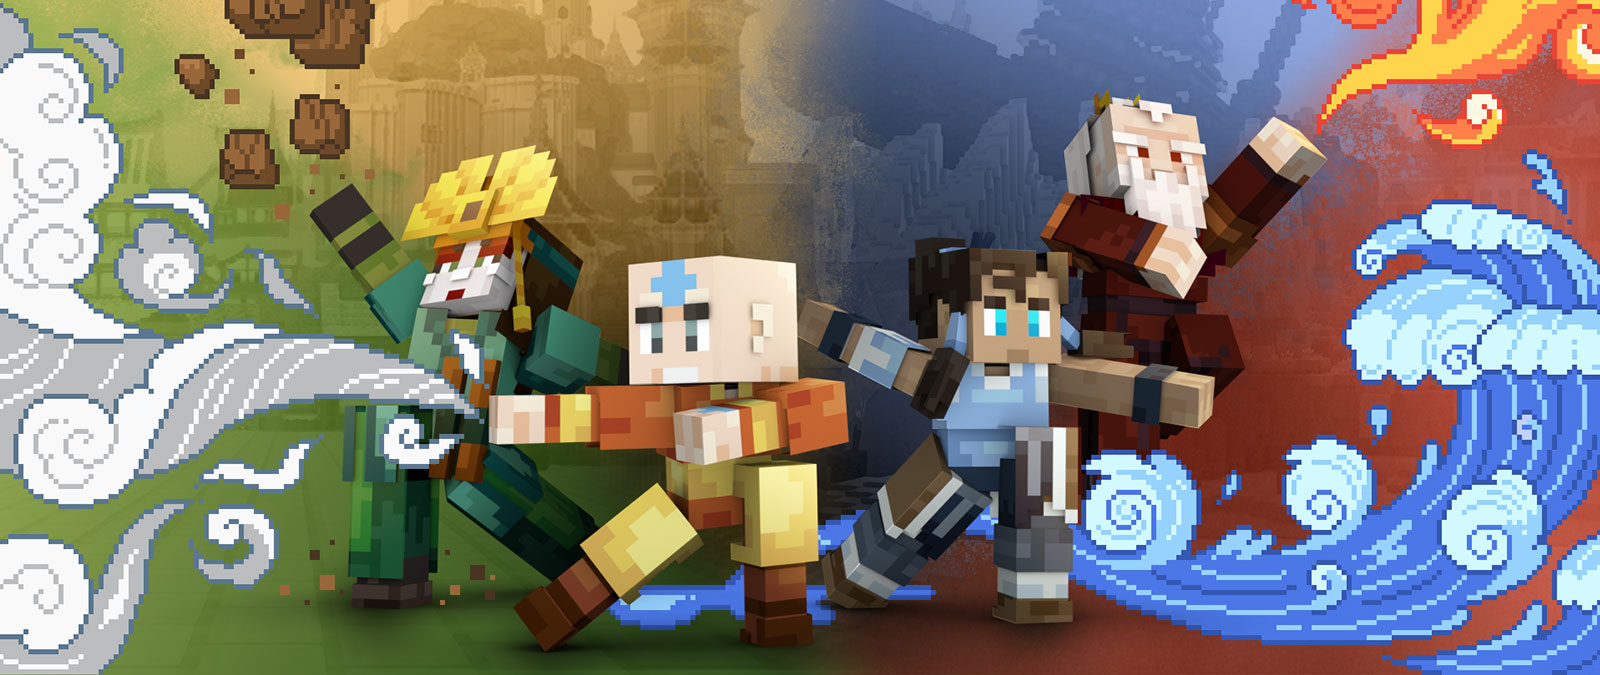 Minecraft versions of Aang, Korra, an earth bender and fire bender pose together, demonstrating their elemental powers.